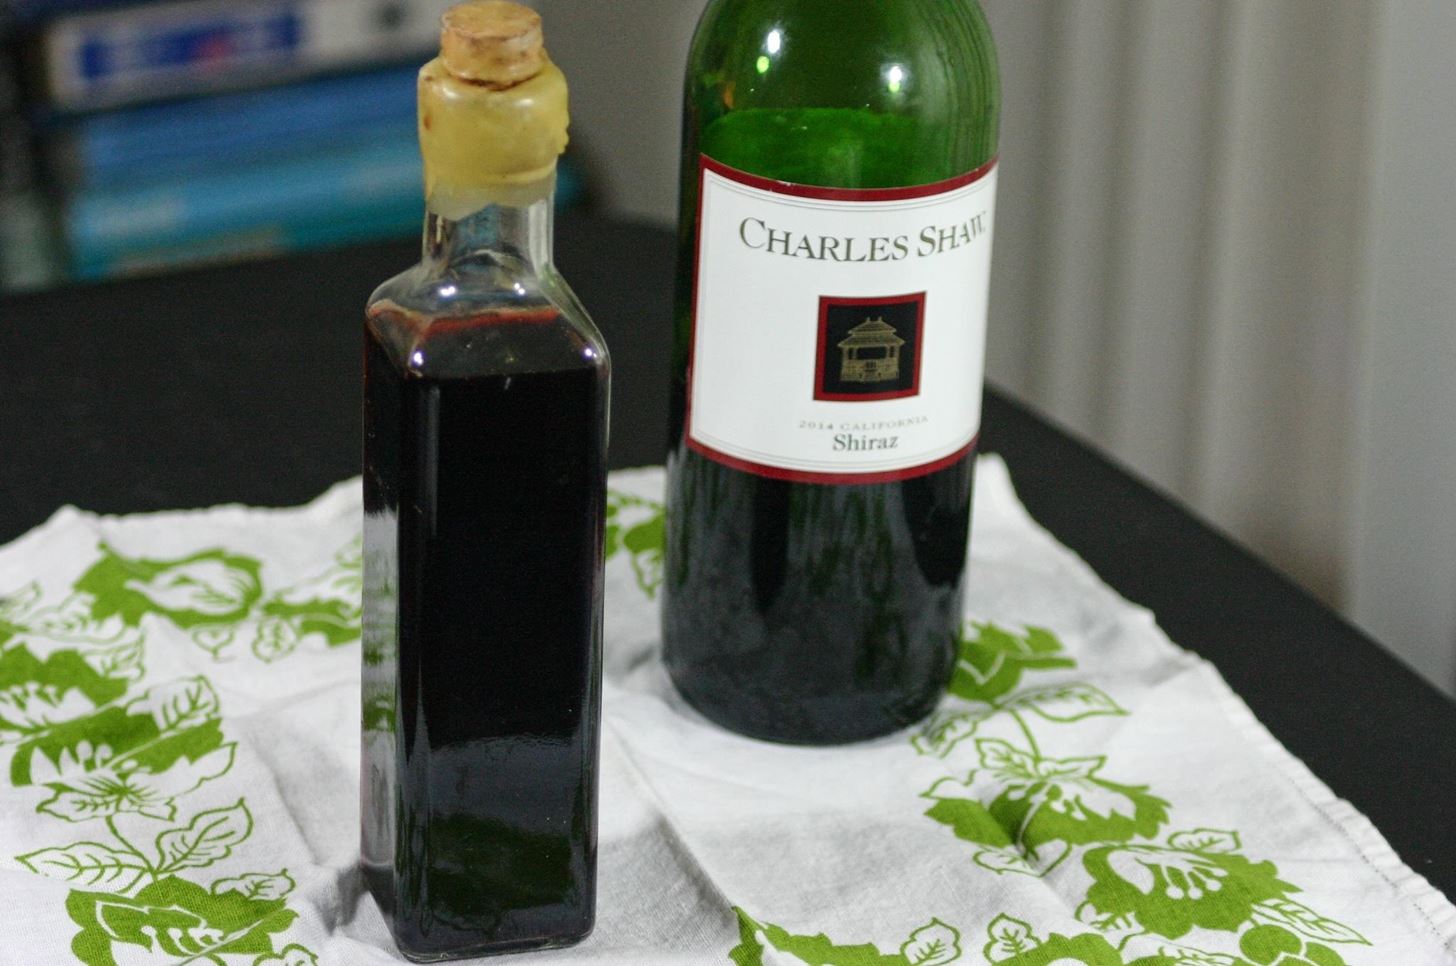 Save That Old, Opened Wine in Your Fridge by Making Homemade Vinegar